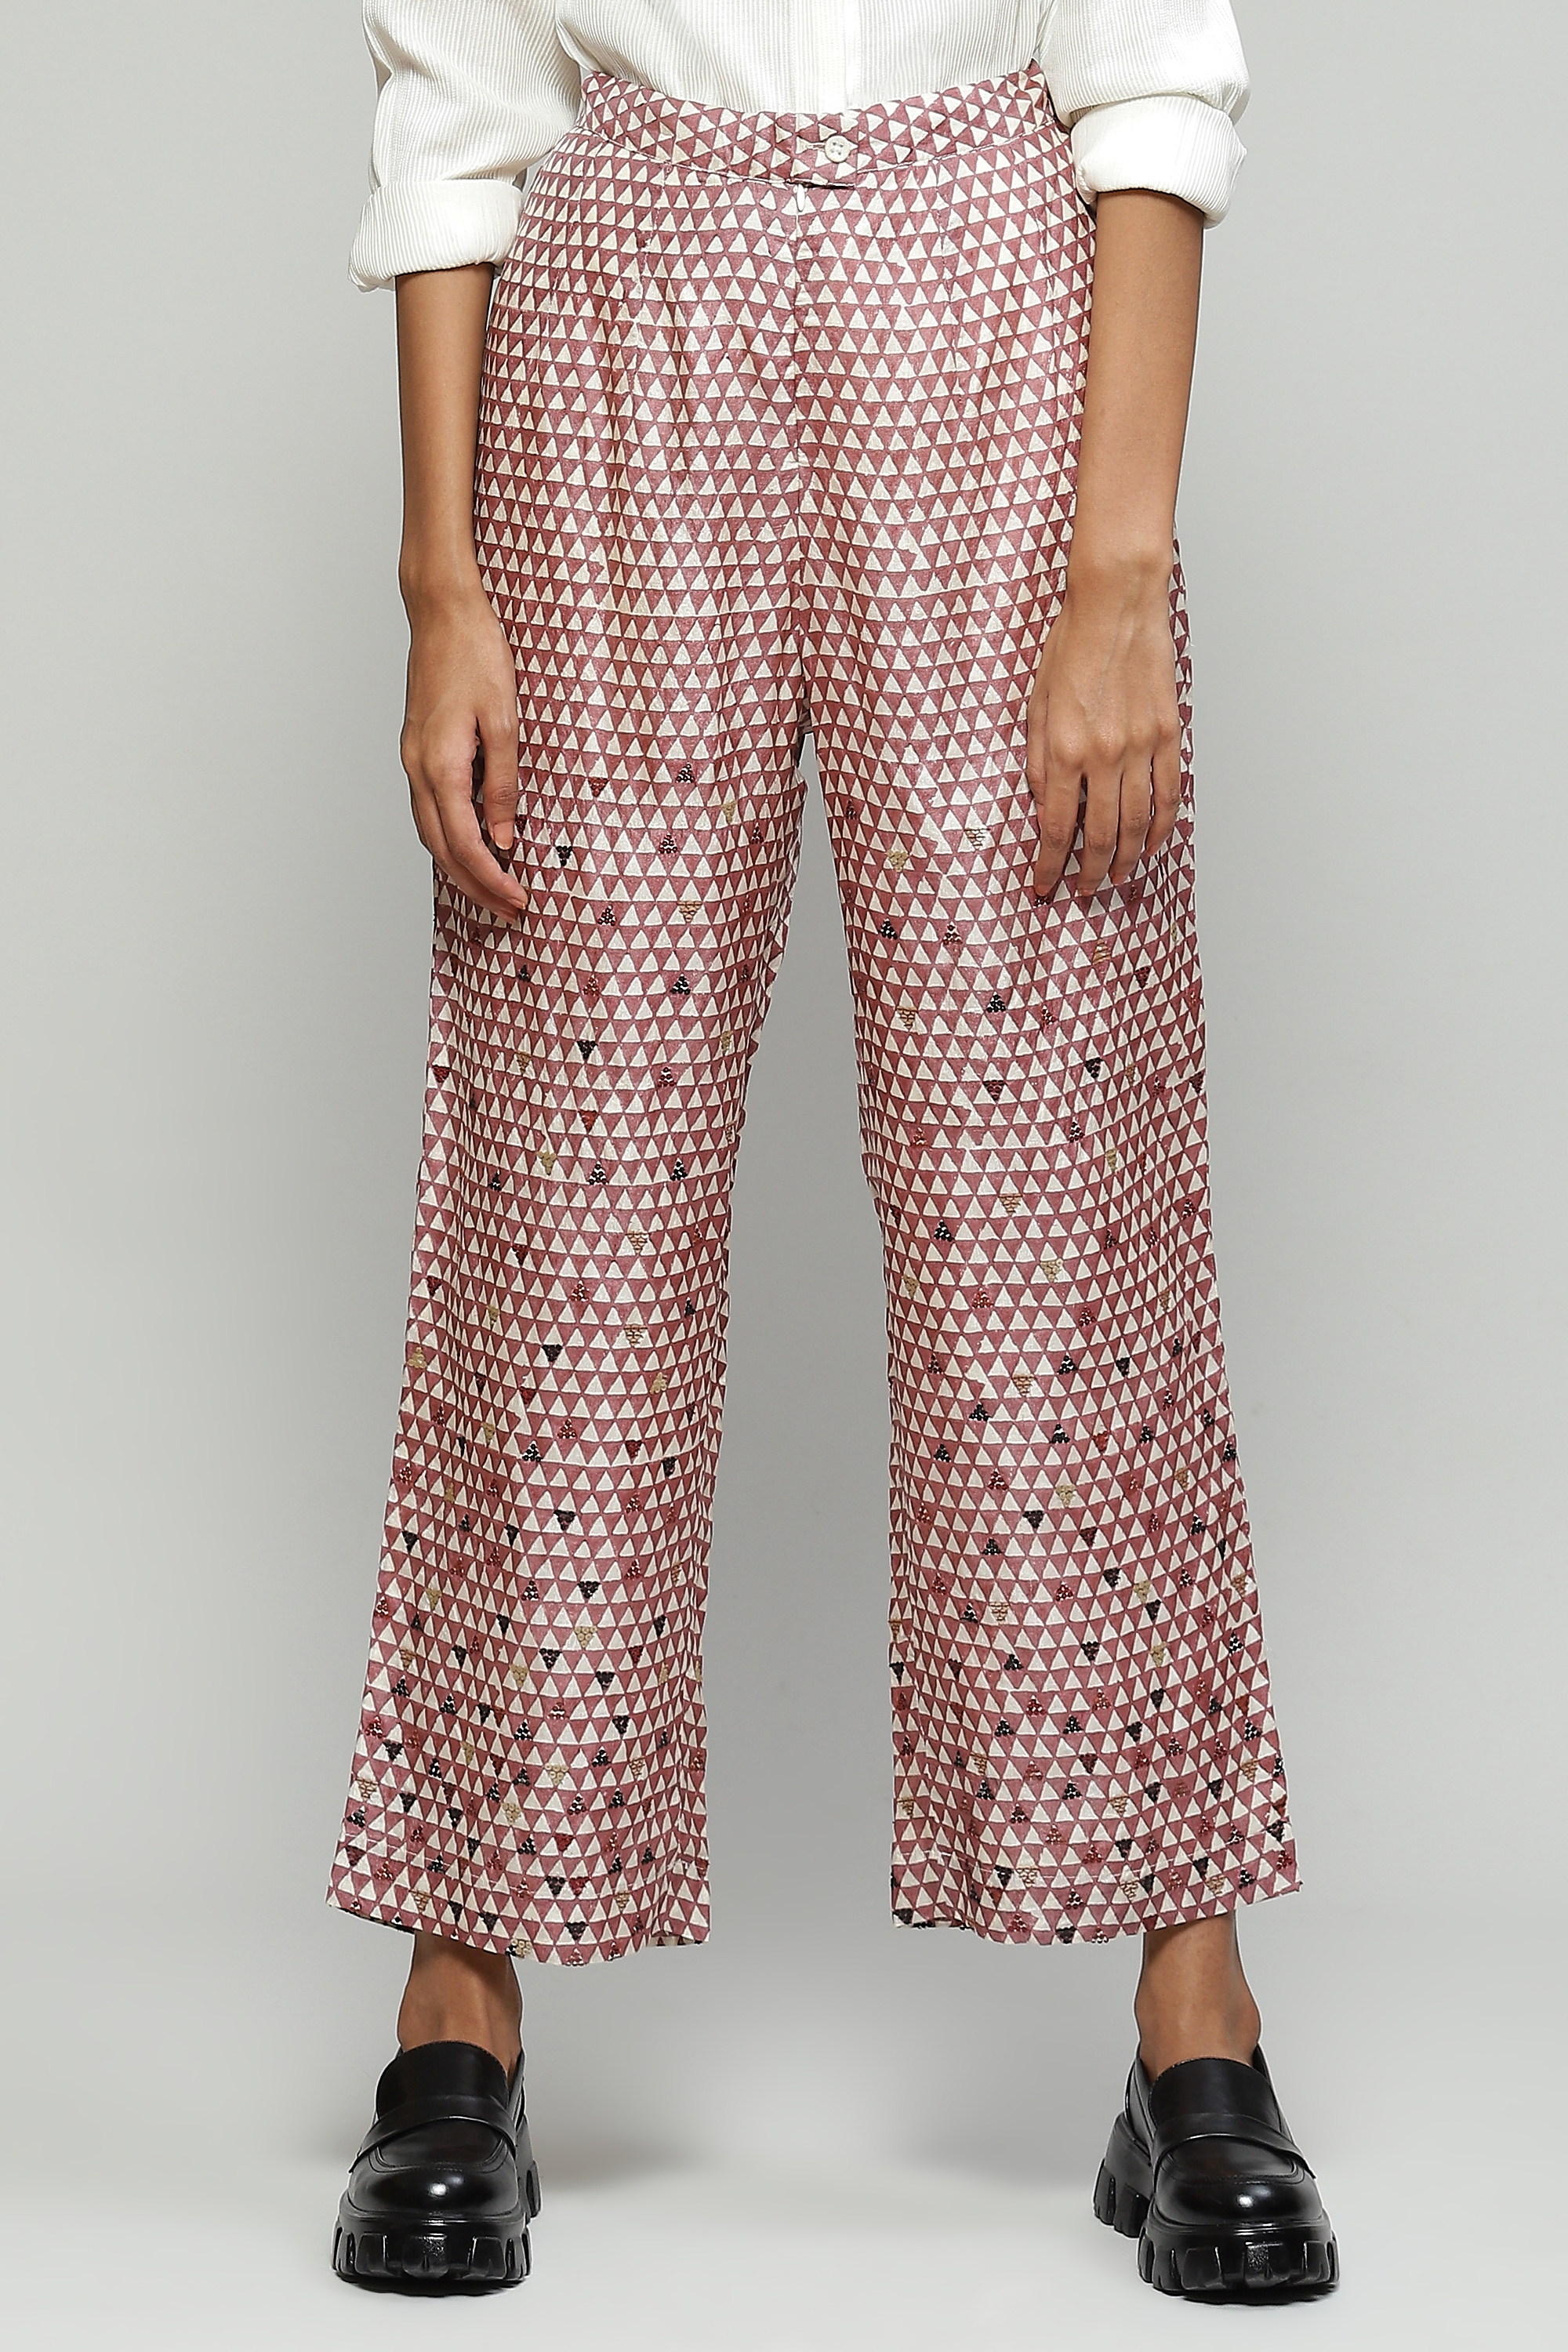 ABRAHAM AND THAKORE | Hand Block Printed And Sequinned Pant